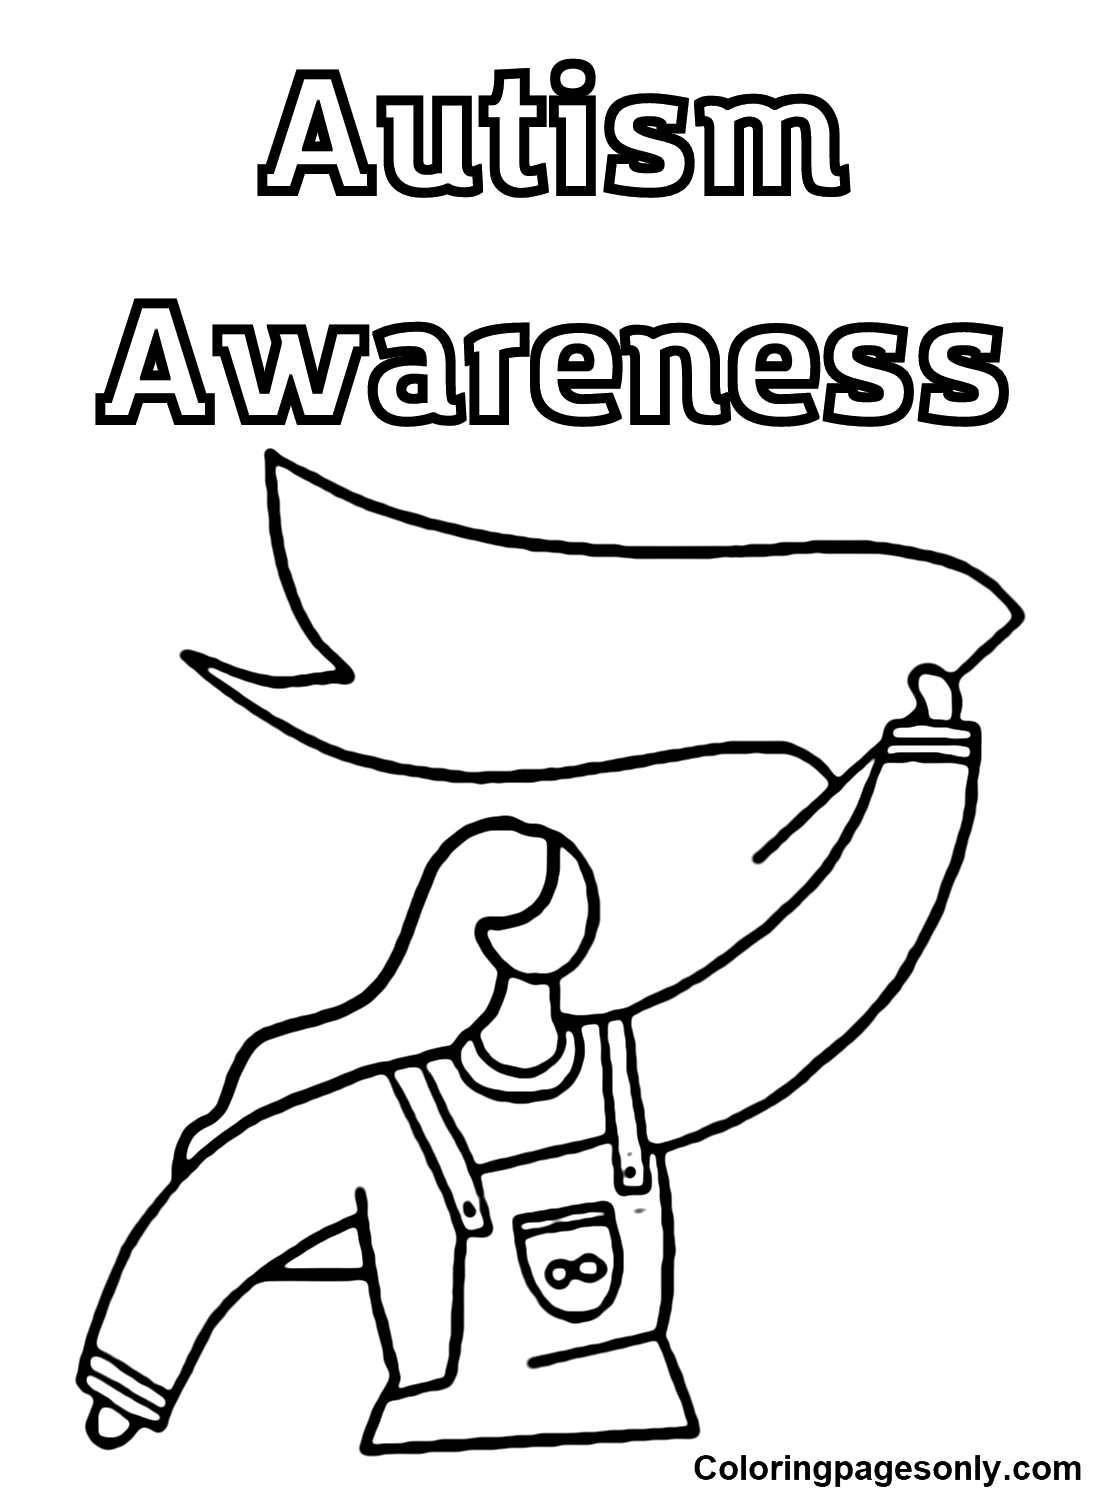 Autism Awareness Girl Coloring Pages